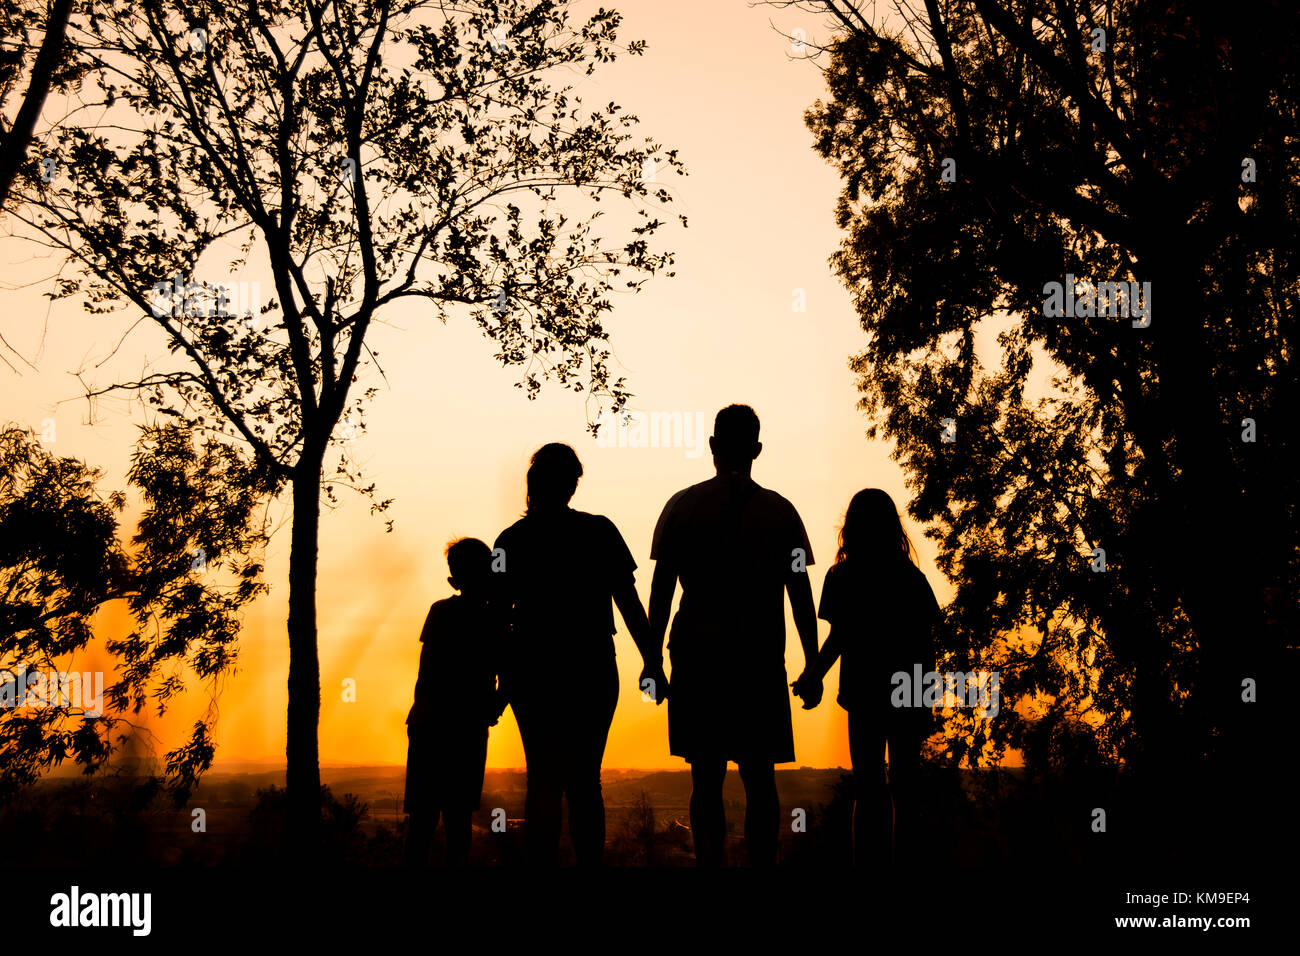 Silhouette of a family with two children holding hands at sunset Stock Photo